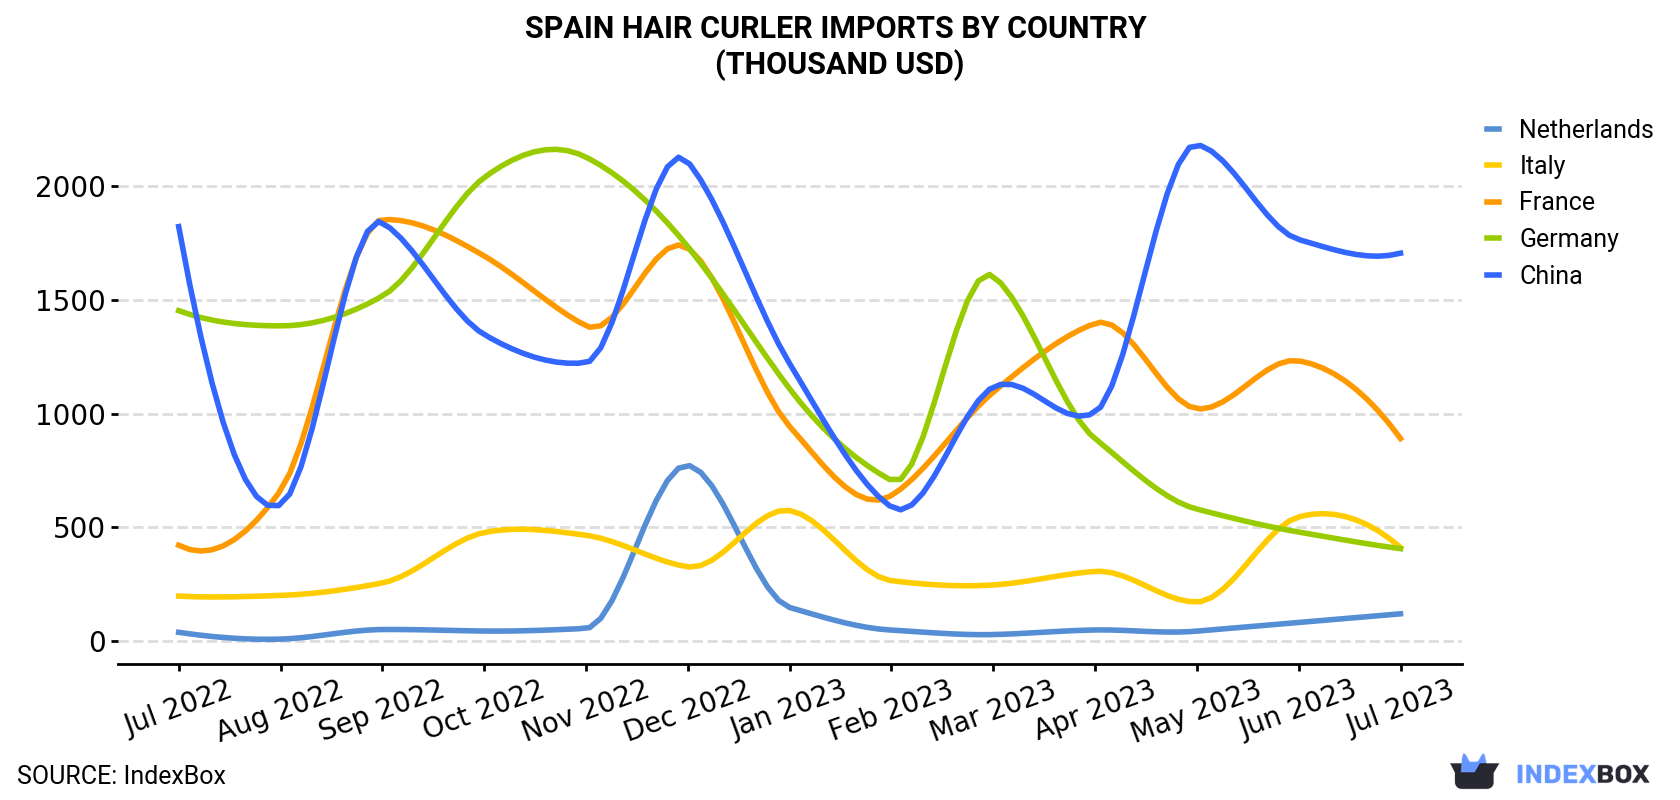 Spain Hair Curler Imports By Country (Thousand USD)